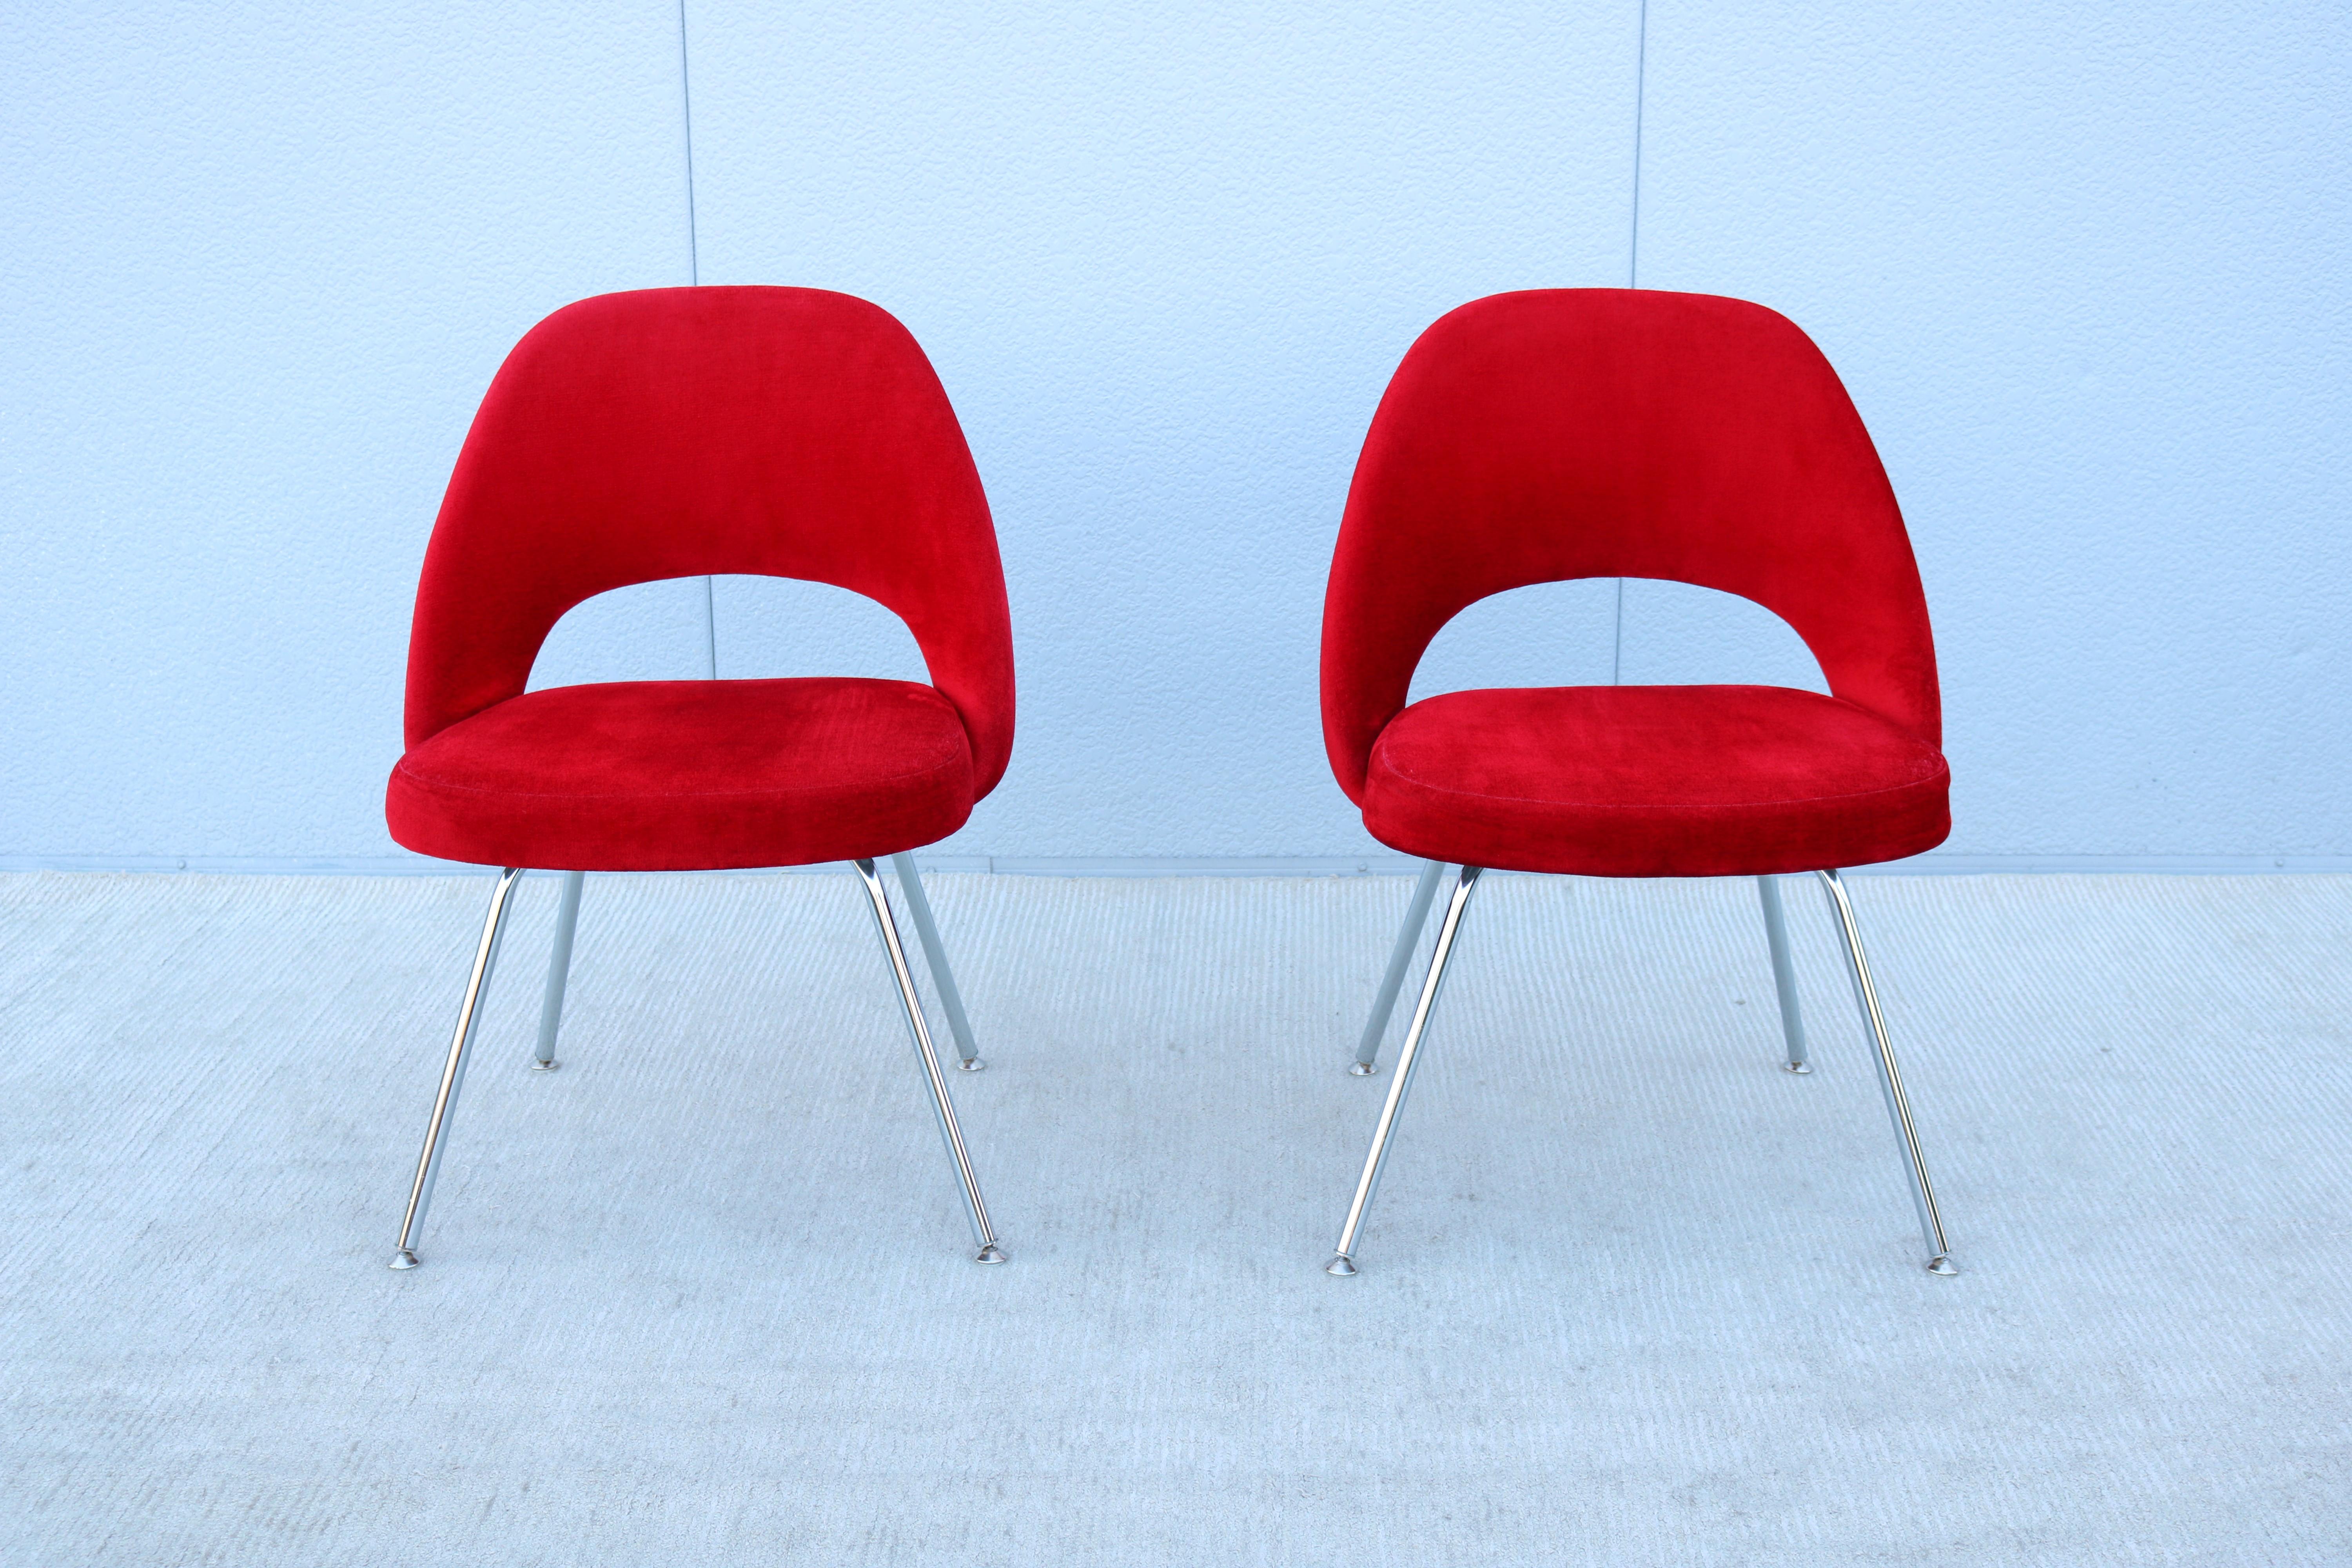 Stunning authentic mid-century modern pair of Saarinen executive armless chairs by Knoll.
One of Knoll's most popular designs that achieved supreme comfort through the shape of its shell.
It was introduced in 1950 a midcentury modern classic of the